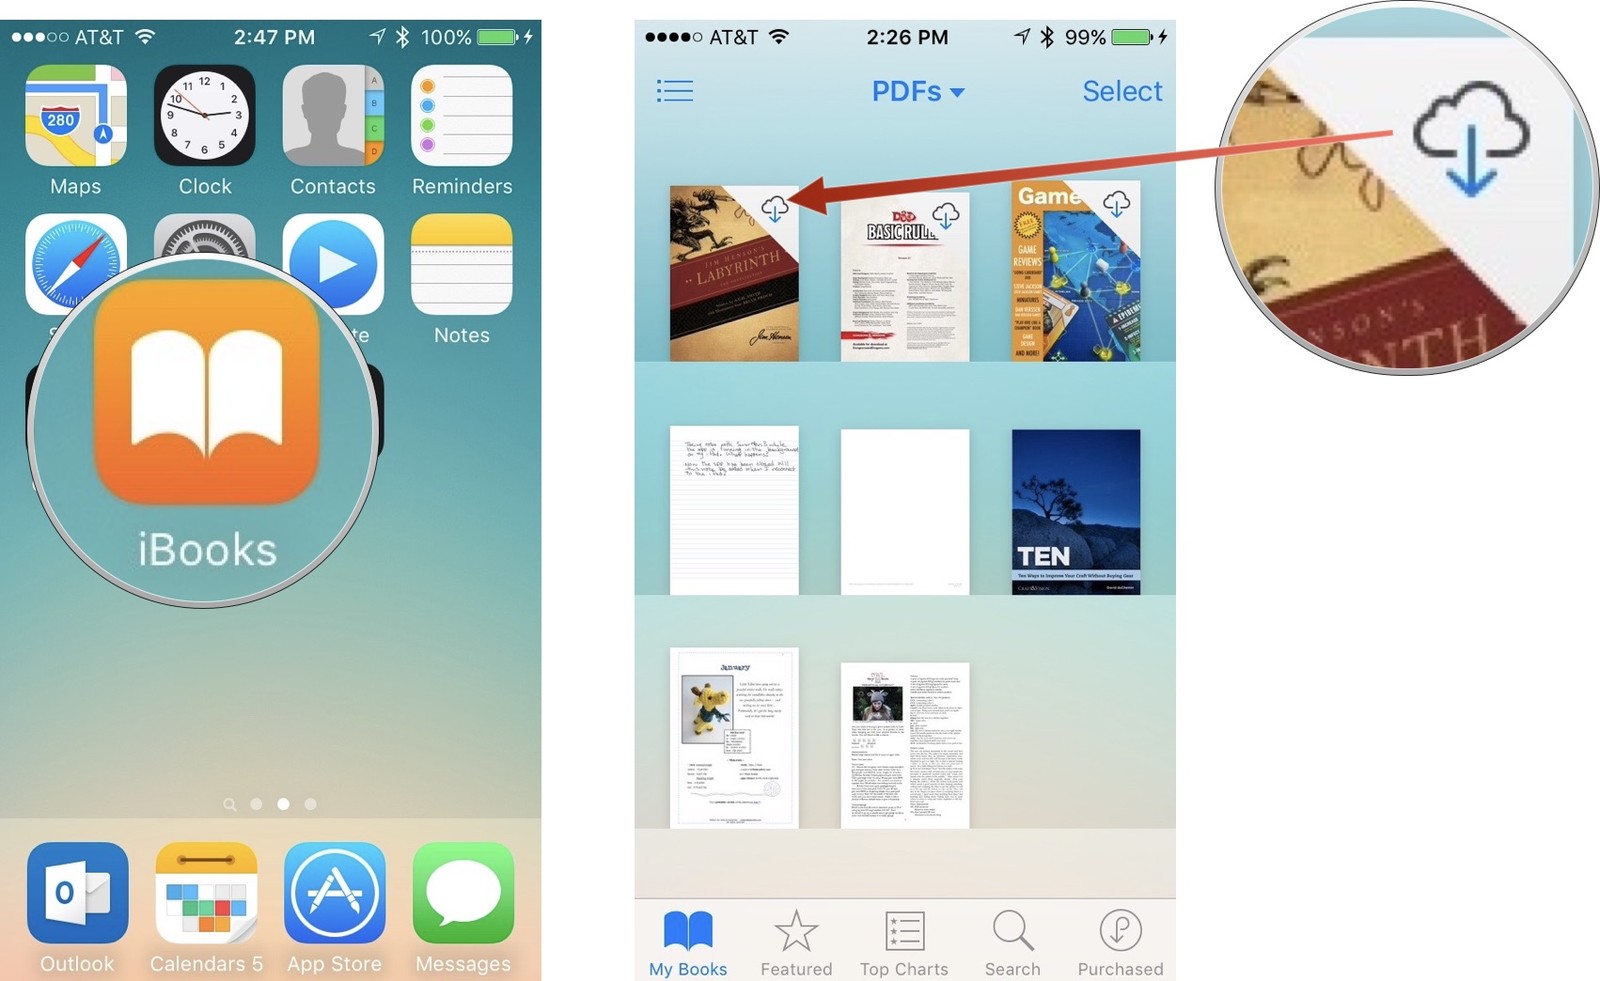 How To Download Free Books On Ibooks